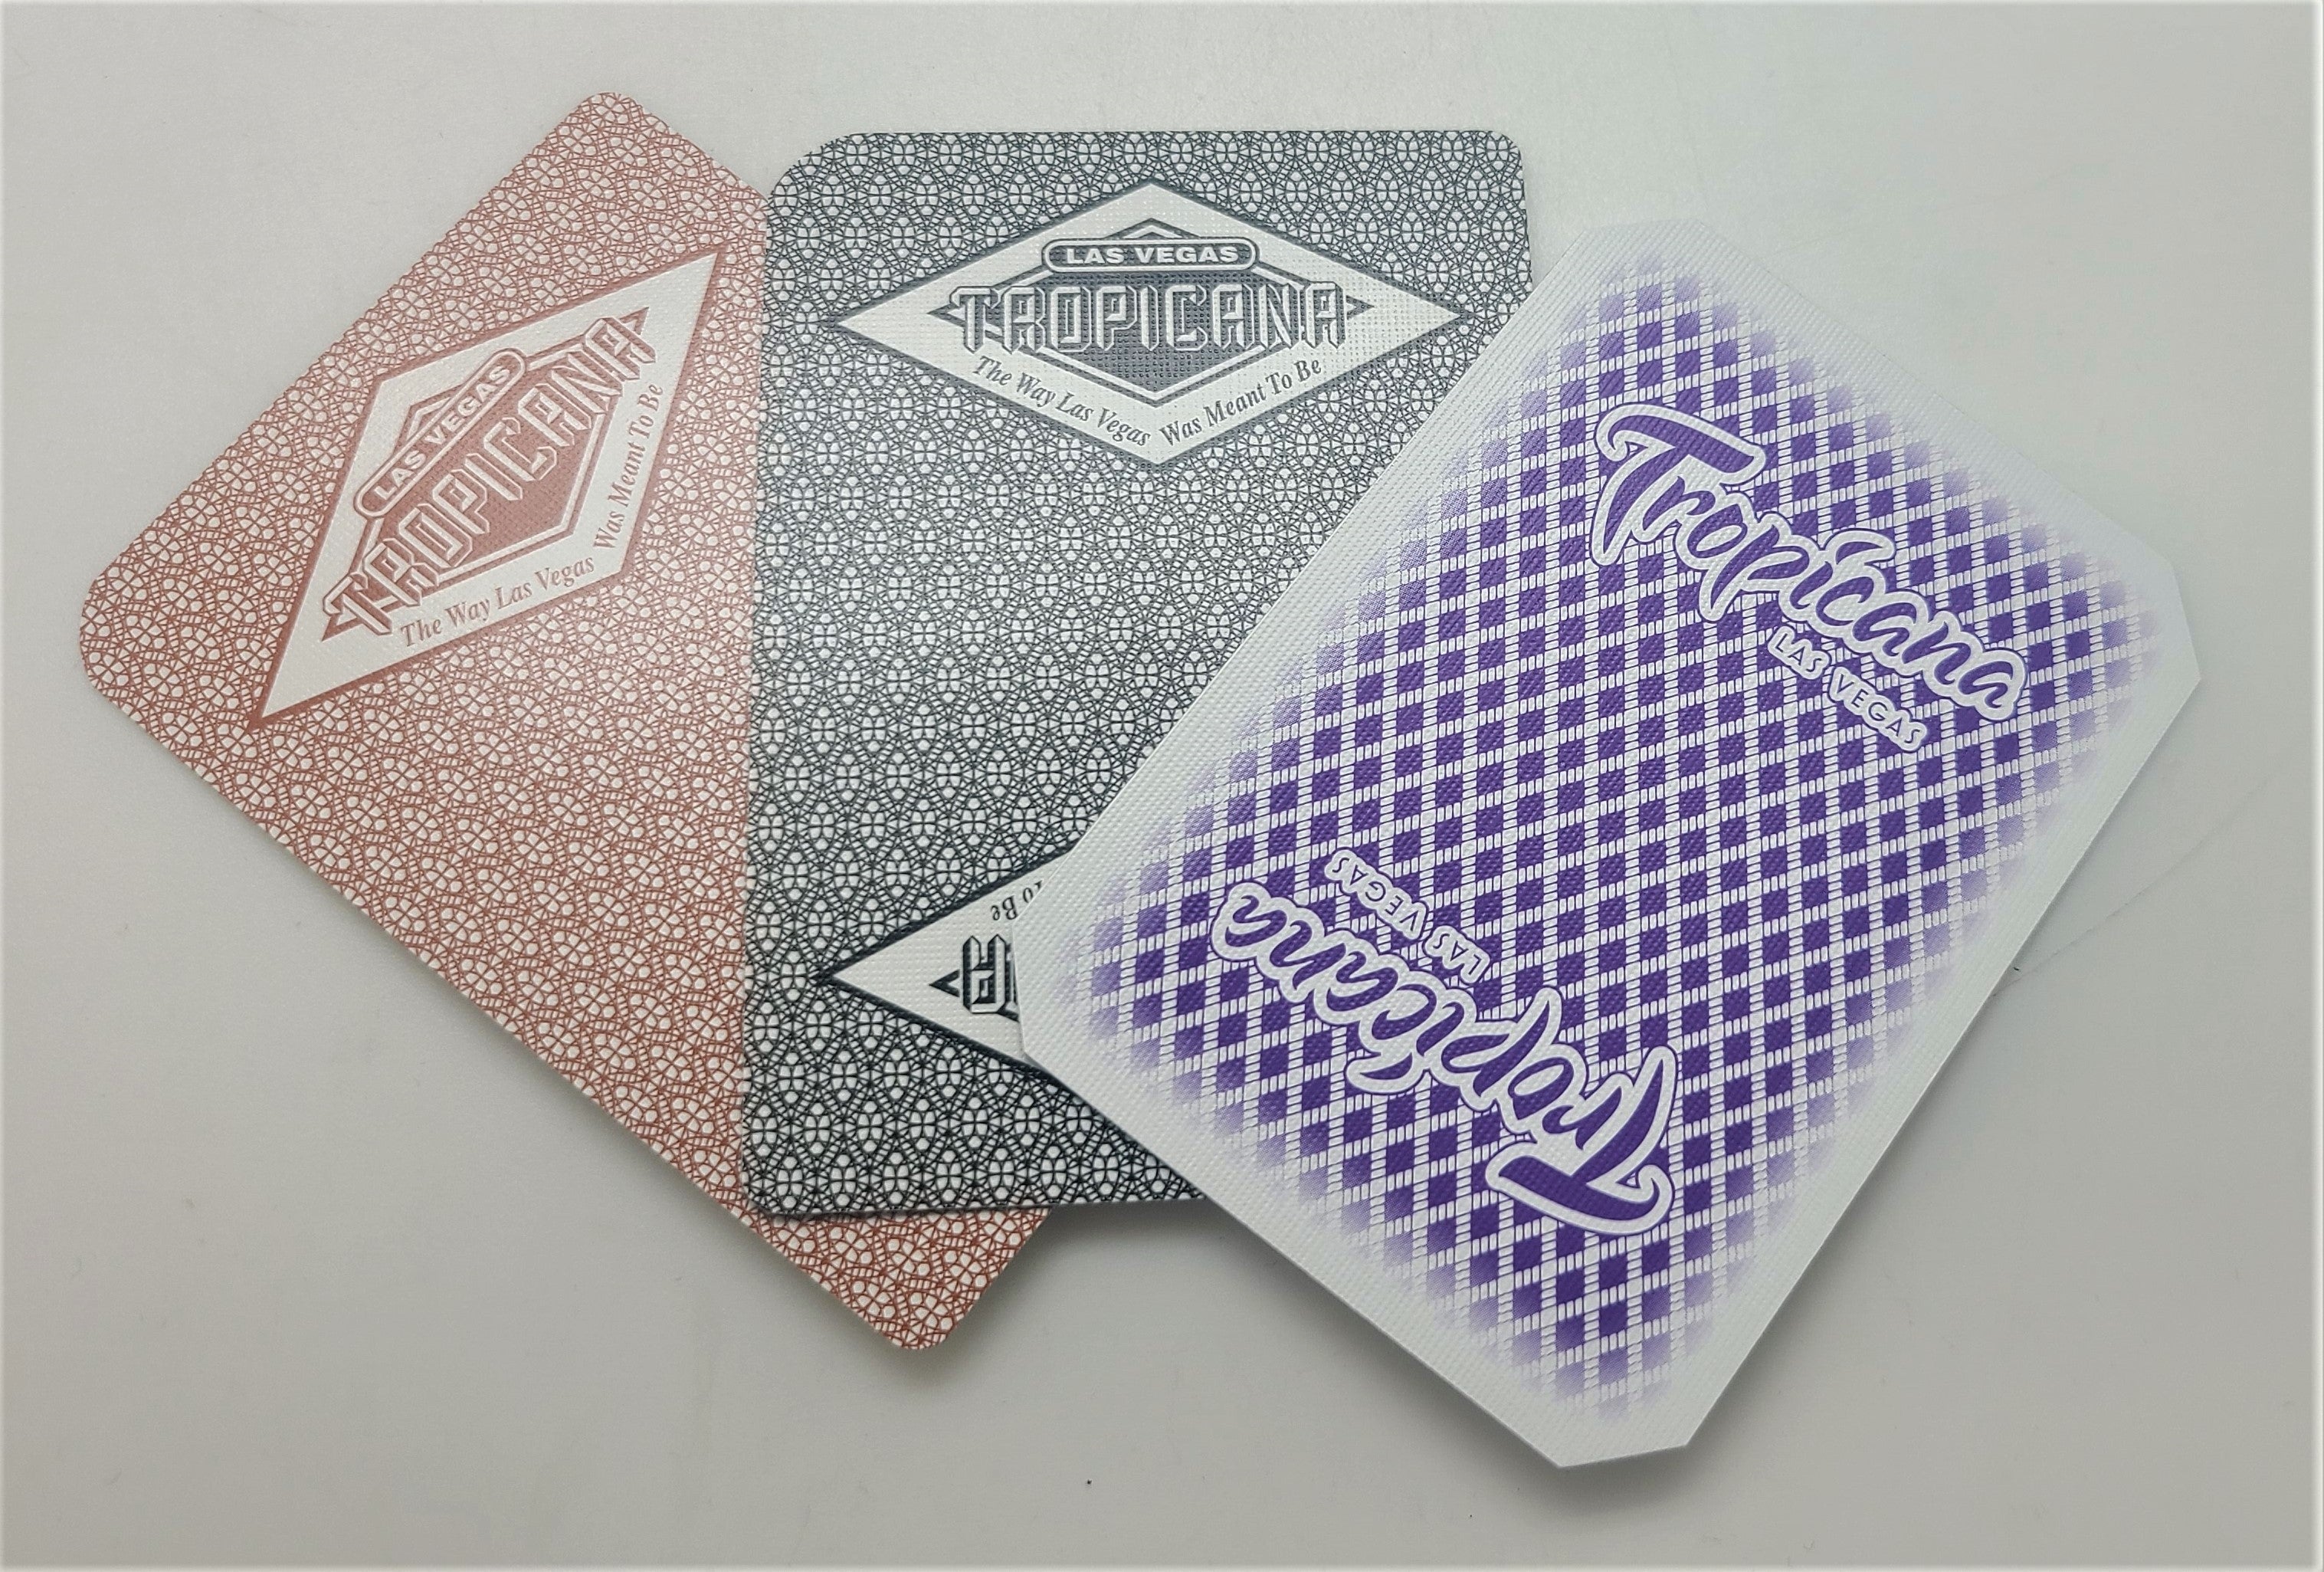 Tropicana Playing Cards